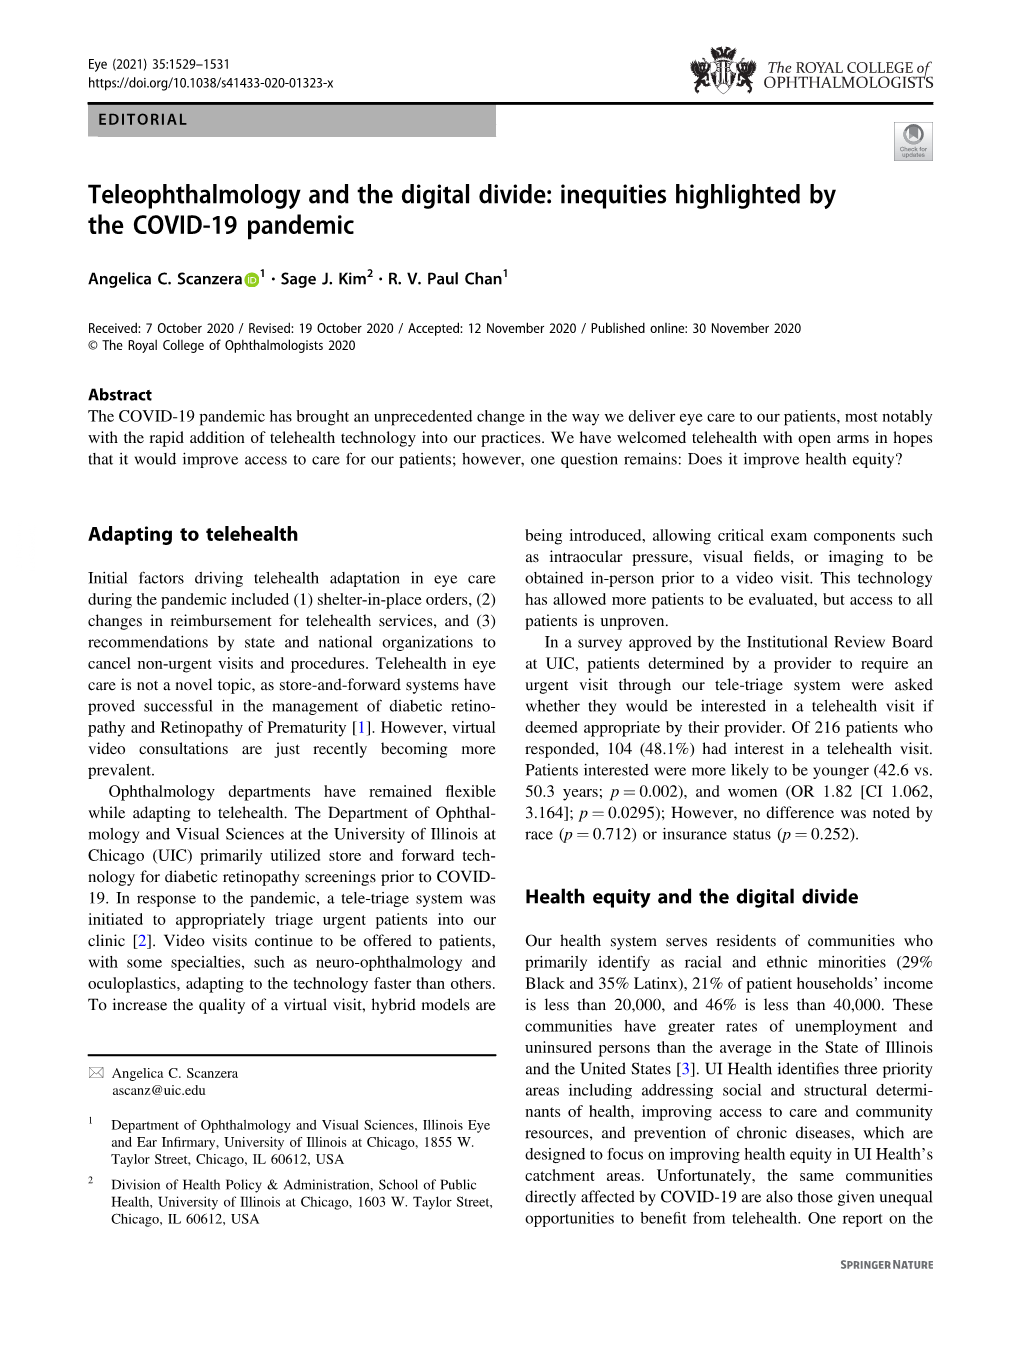 Teleophthalmology and the Digital Divide: Inequities Highlighted by the COVID-19 Pandemic